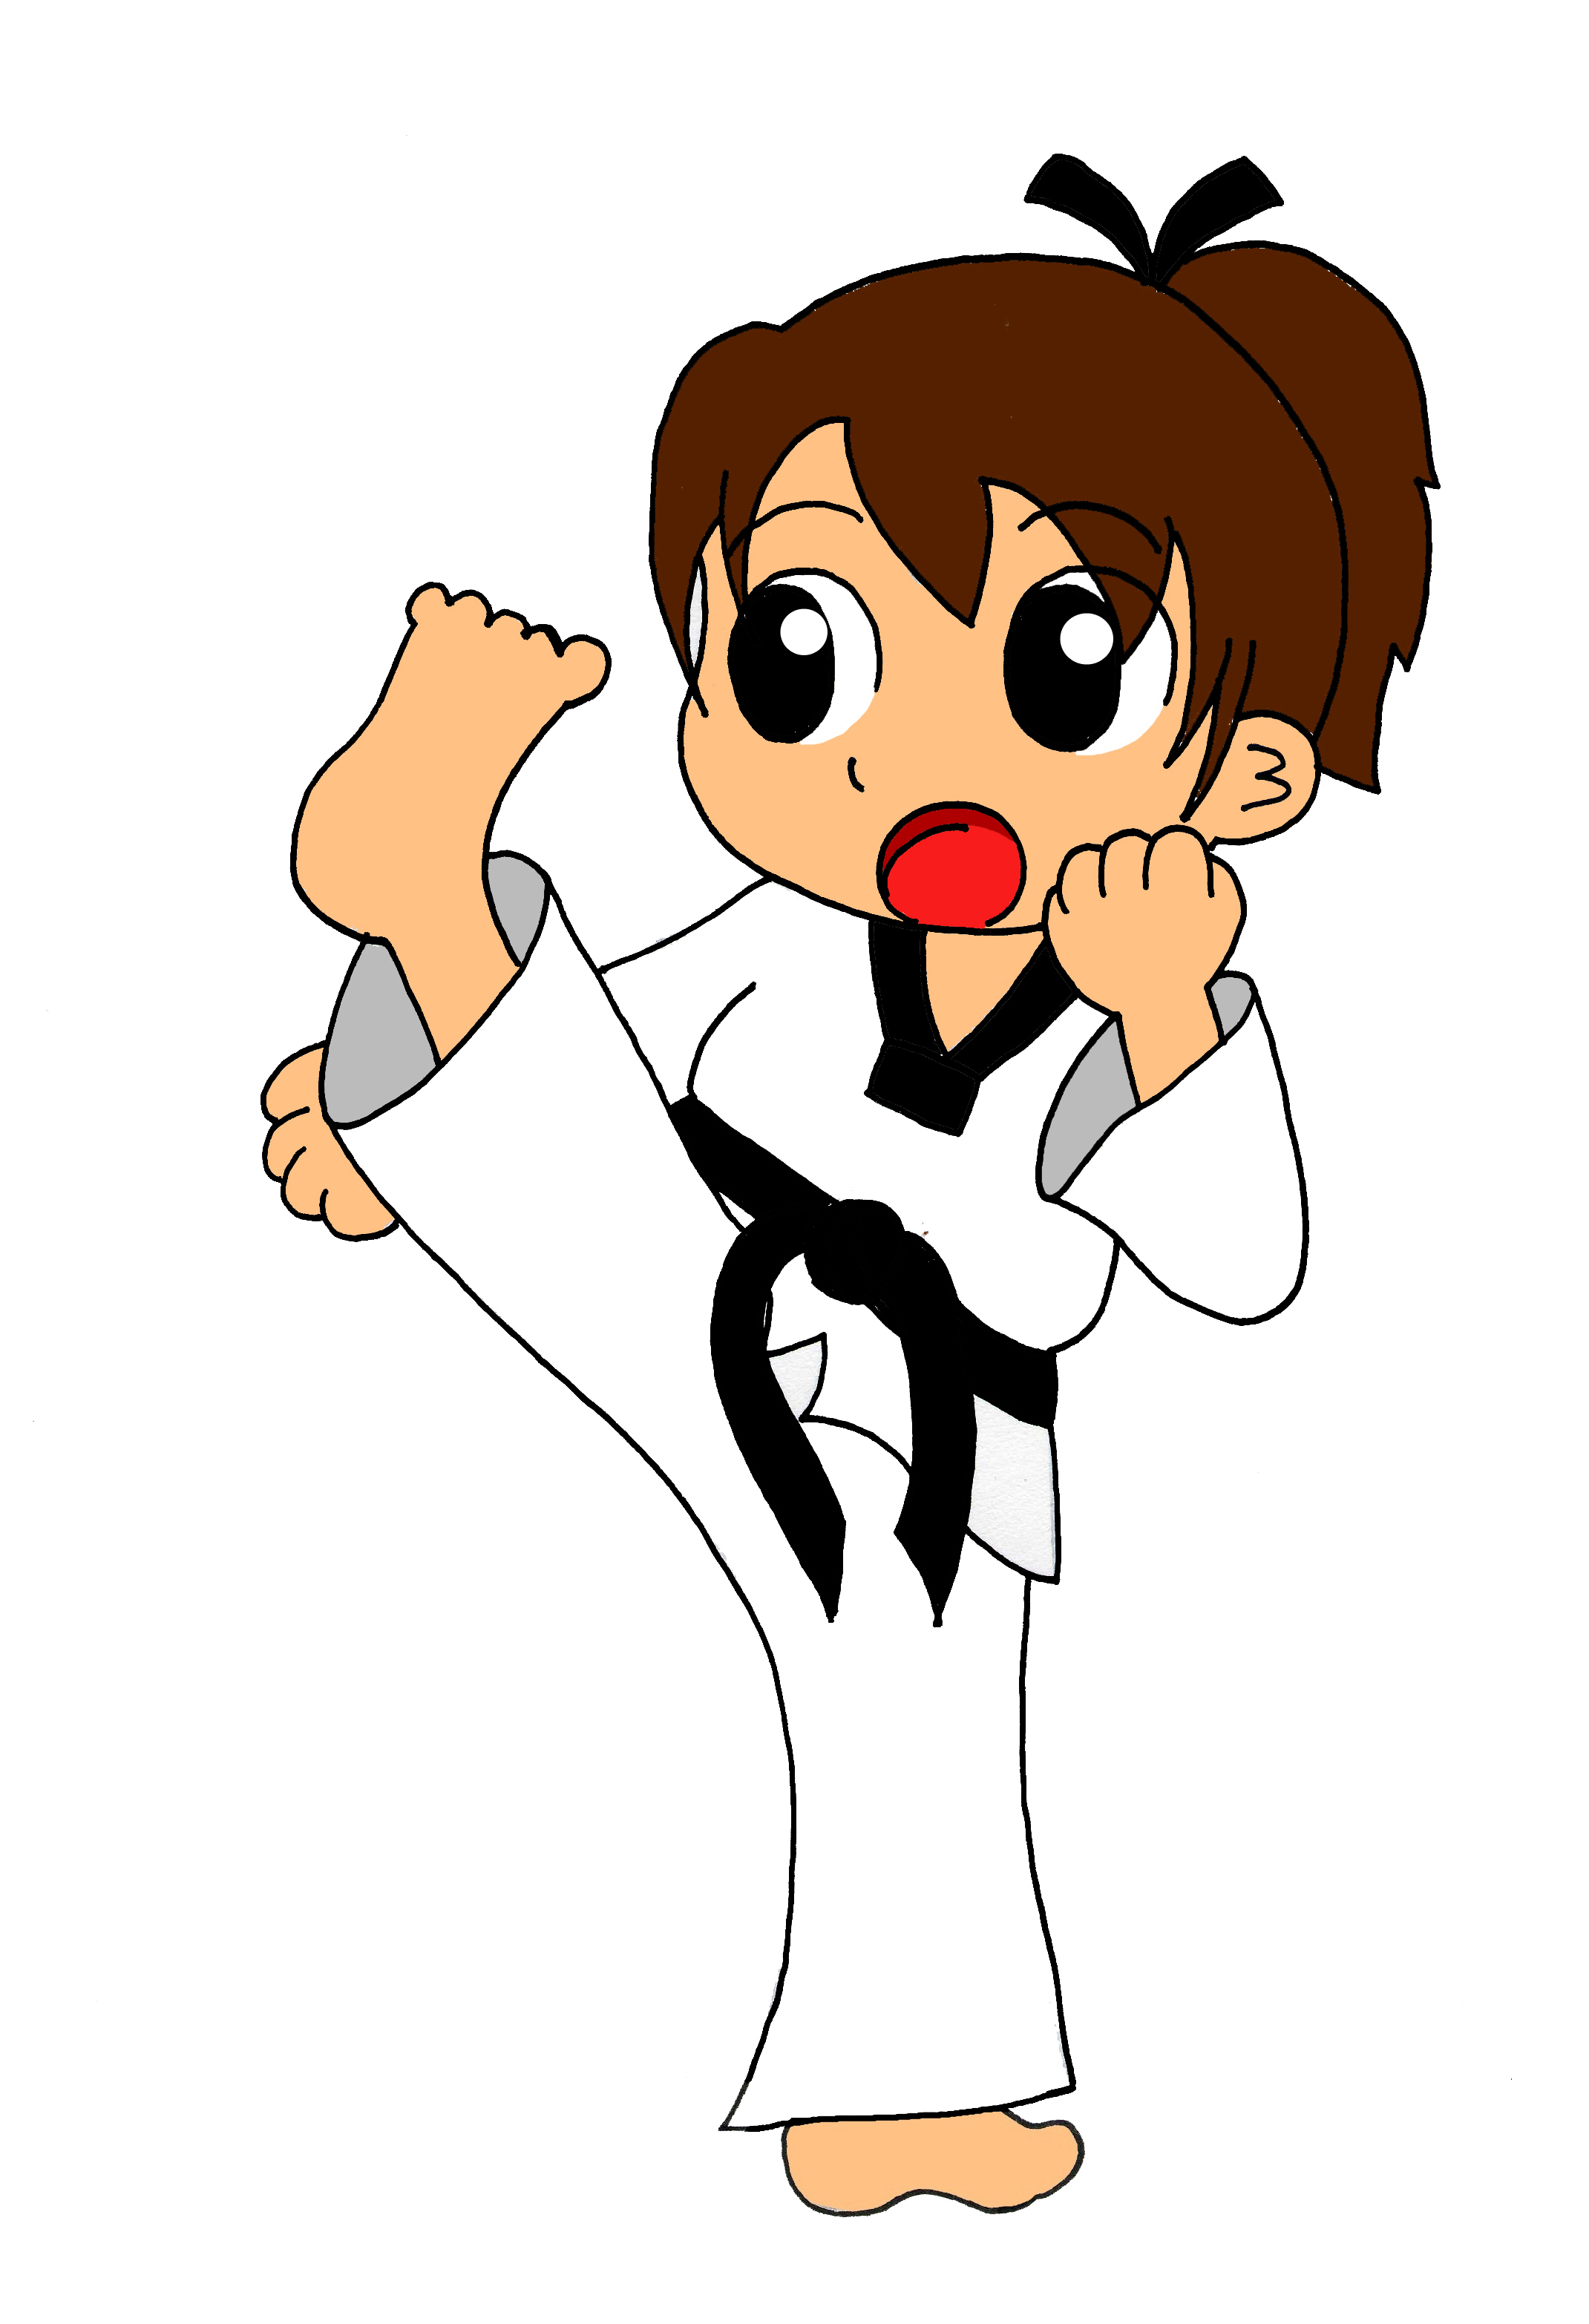 Karate clip art kids free free clipart images 2